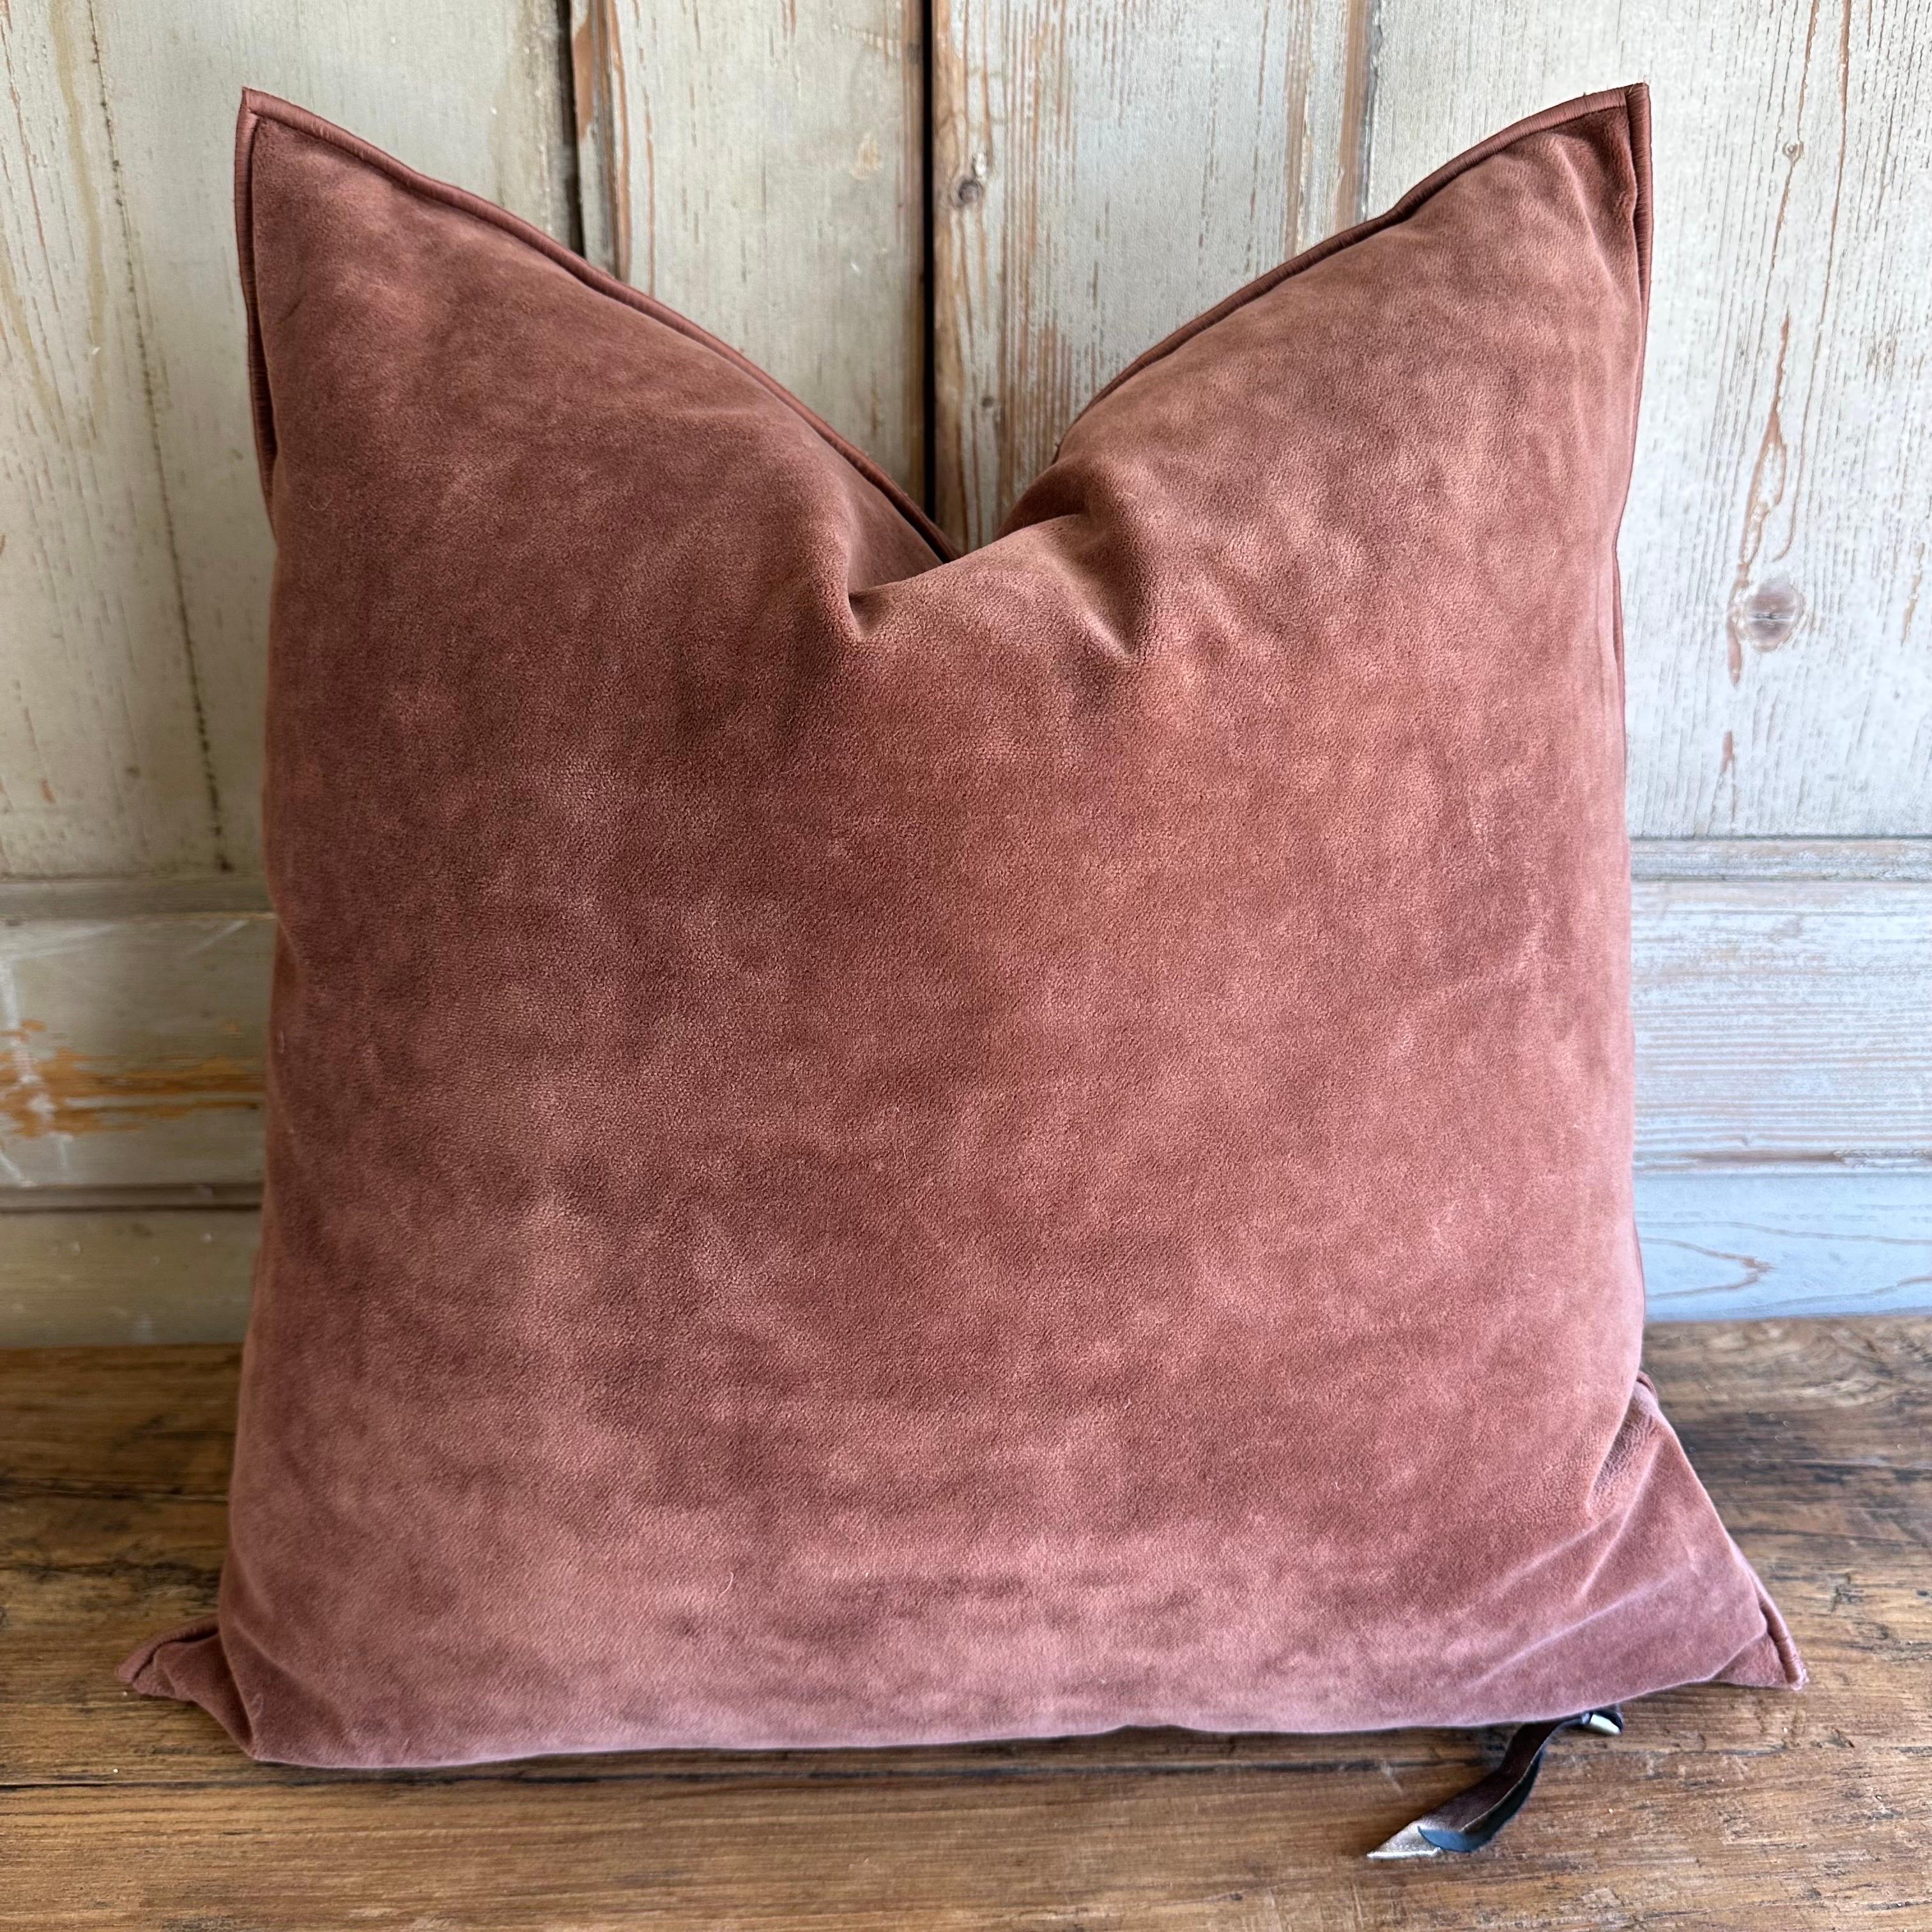 European vintage velvet accent pillow with down feather insert
Size: 22